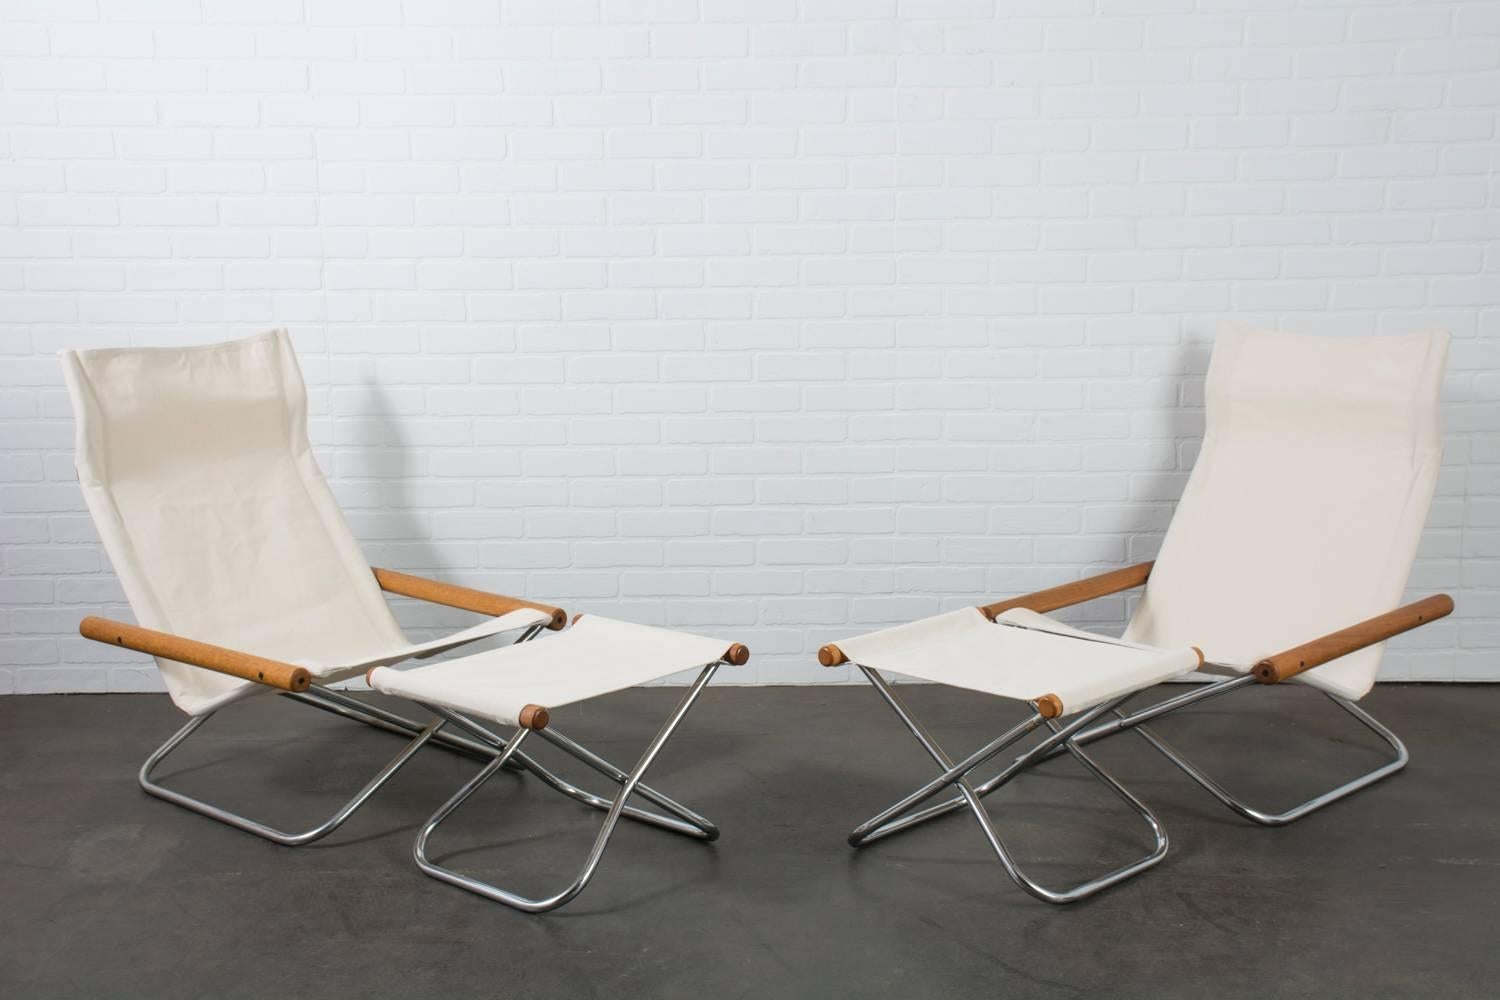 The NY folding lounge chair and ottoman was designed by Japanese designer Takeshi Nii in 1958. He was inspired by the folding form of a traditional director's chair and the simplicity and materials of Danish modern design. The chair was named 